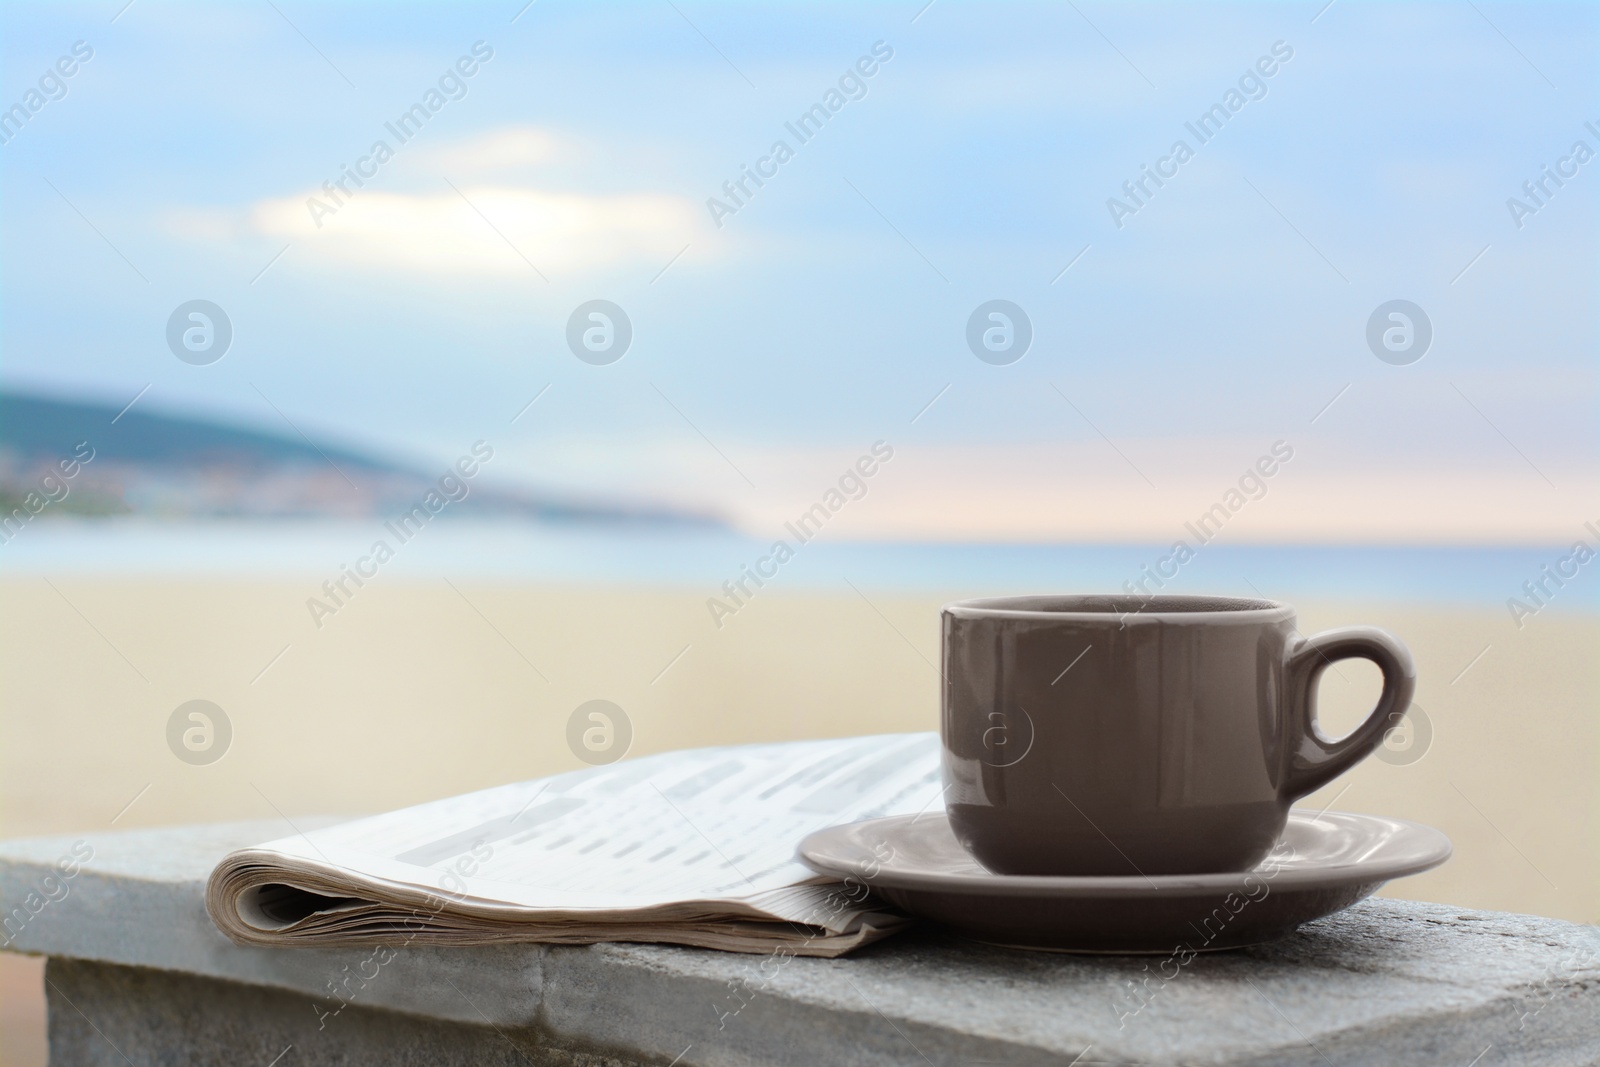 Photo of Ceramic cup of hot drink and newspaper on stone surface near sea in morning. Space for text